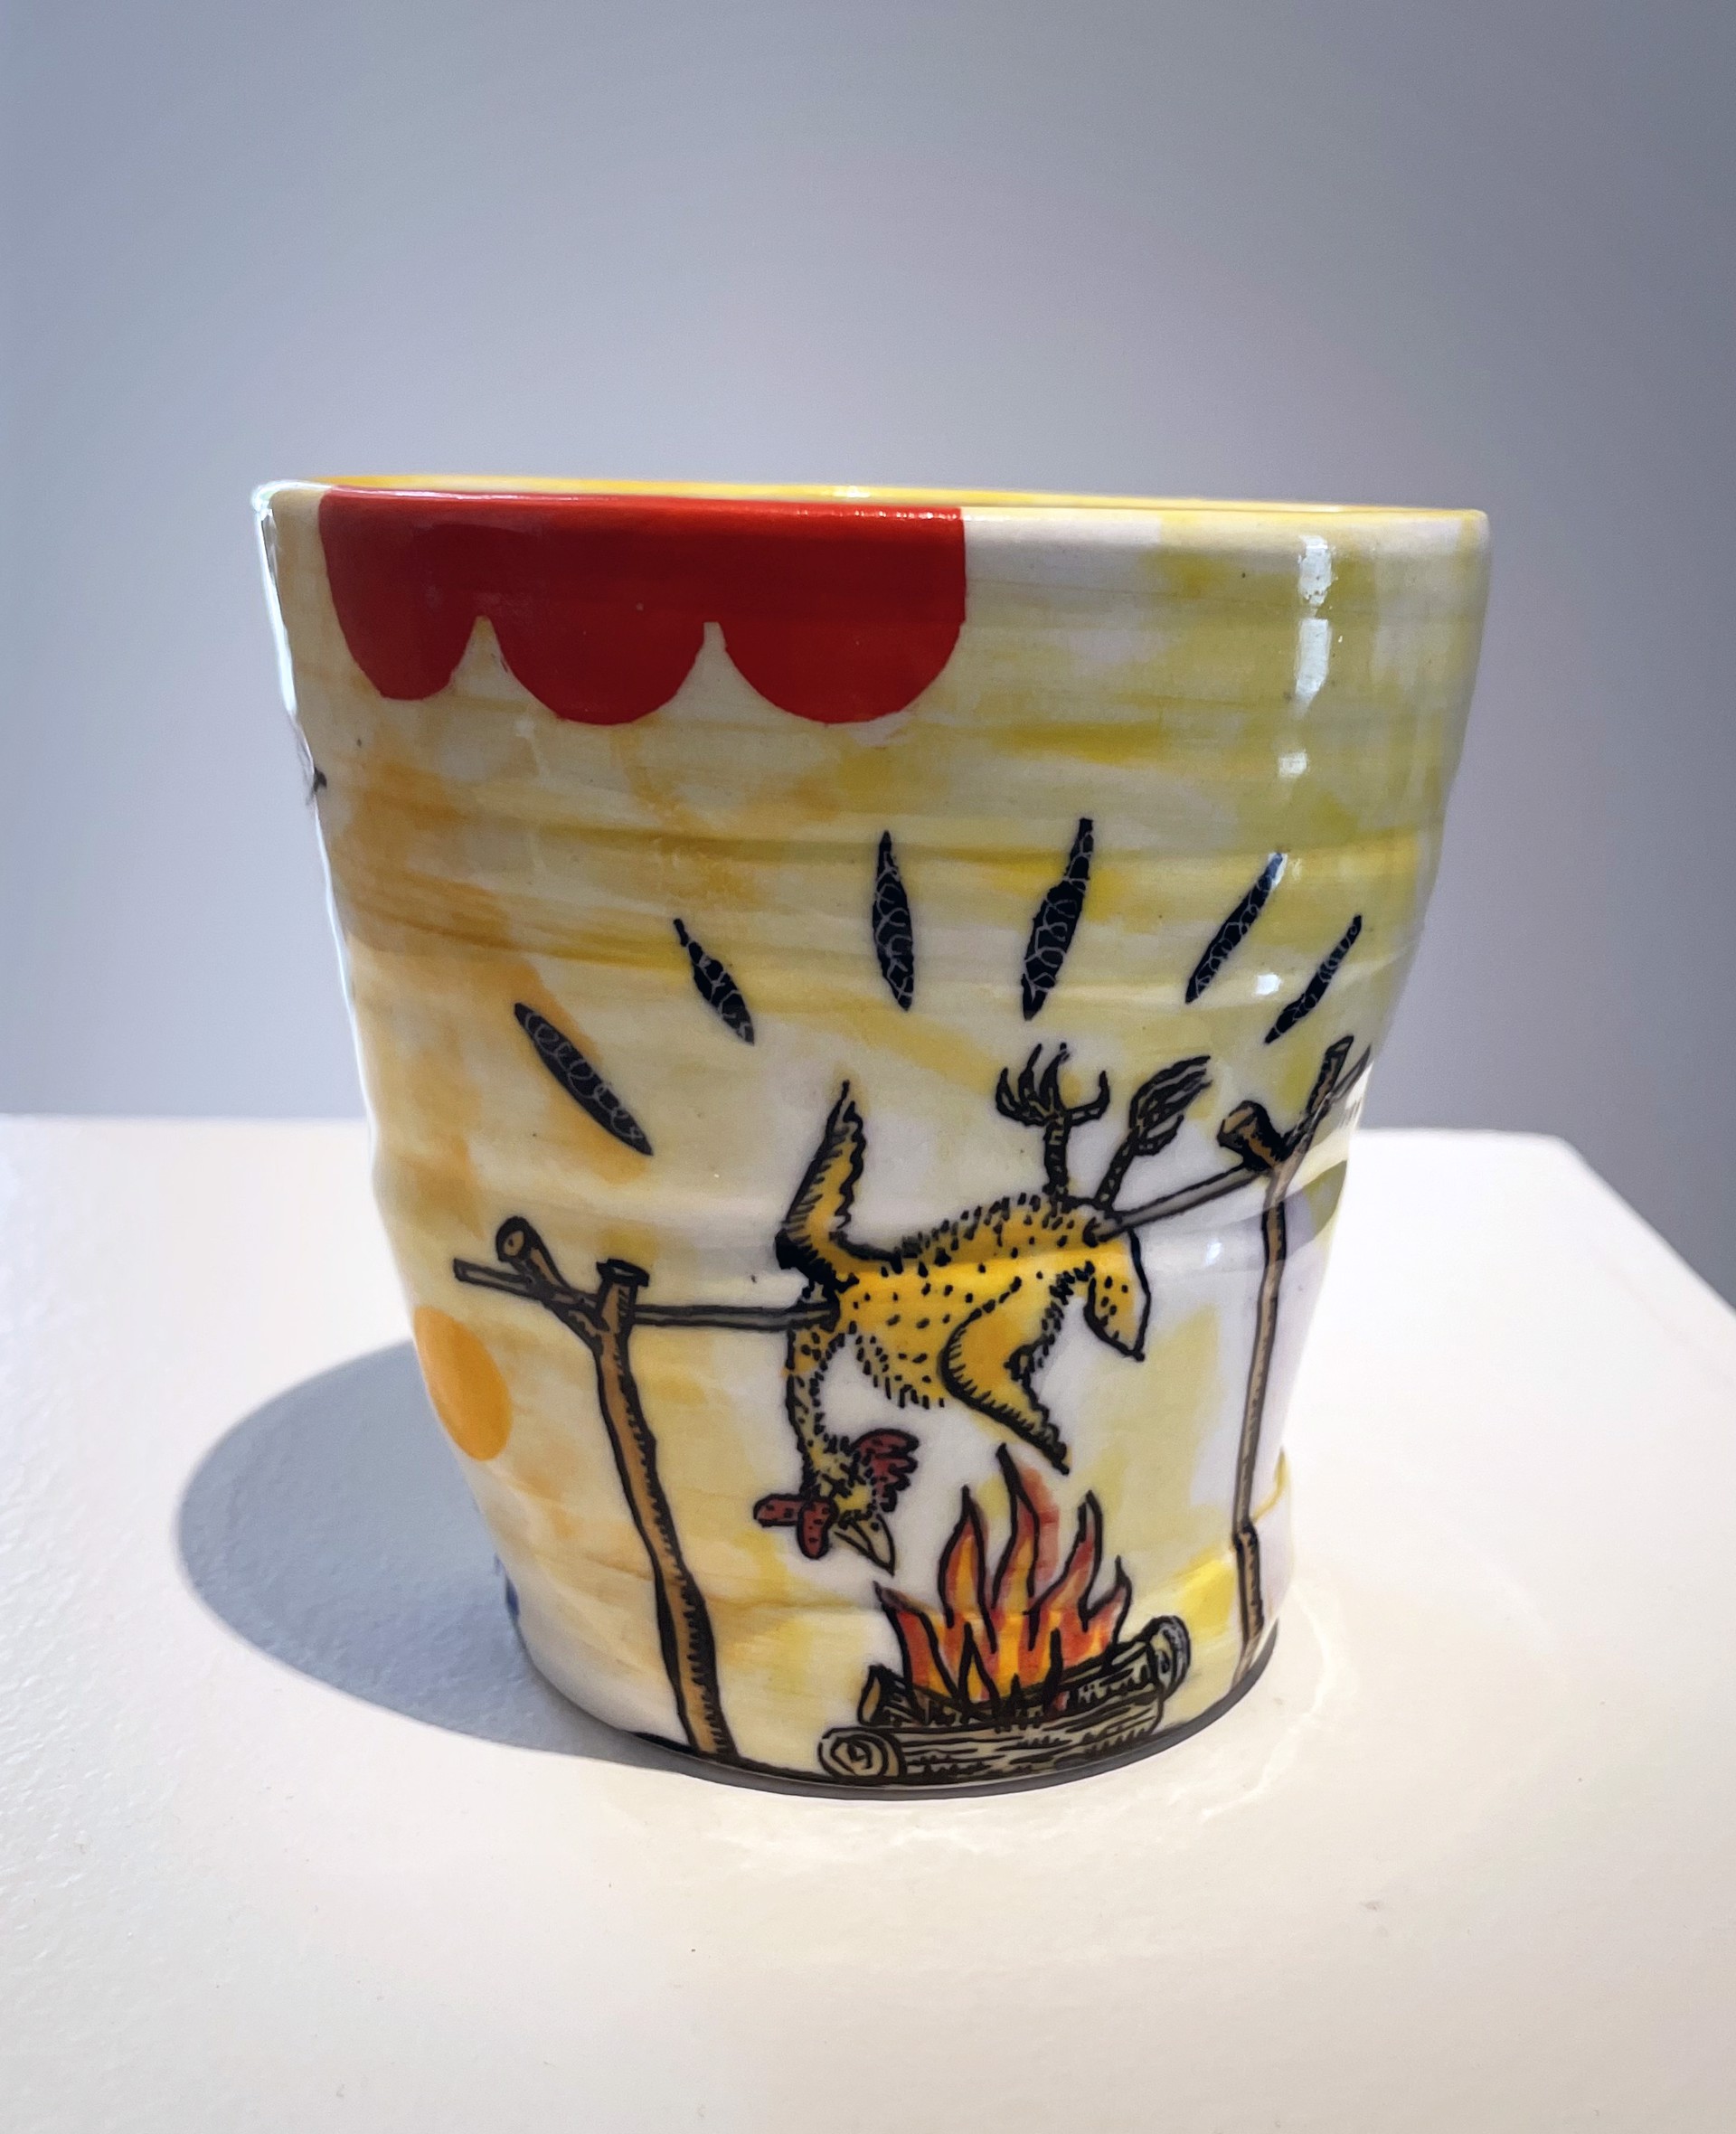 Untitled (Drinking Cup) by Michael Corney